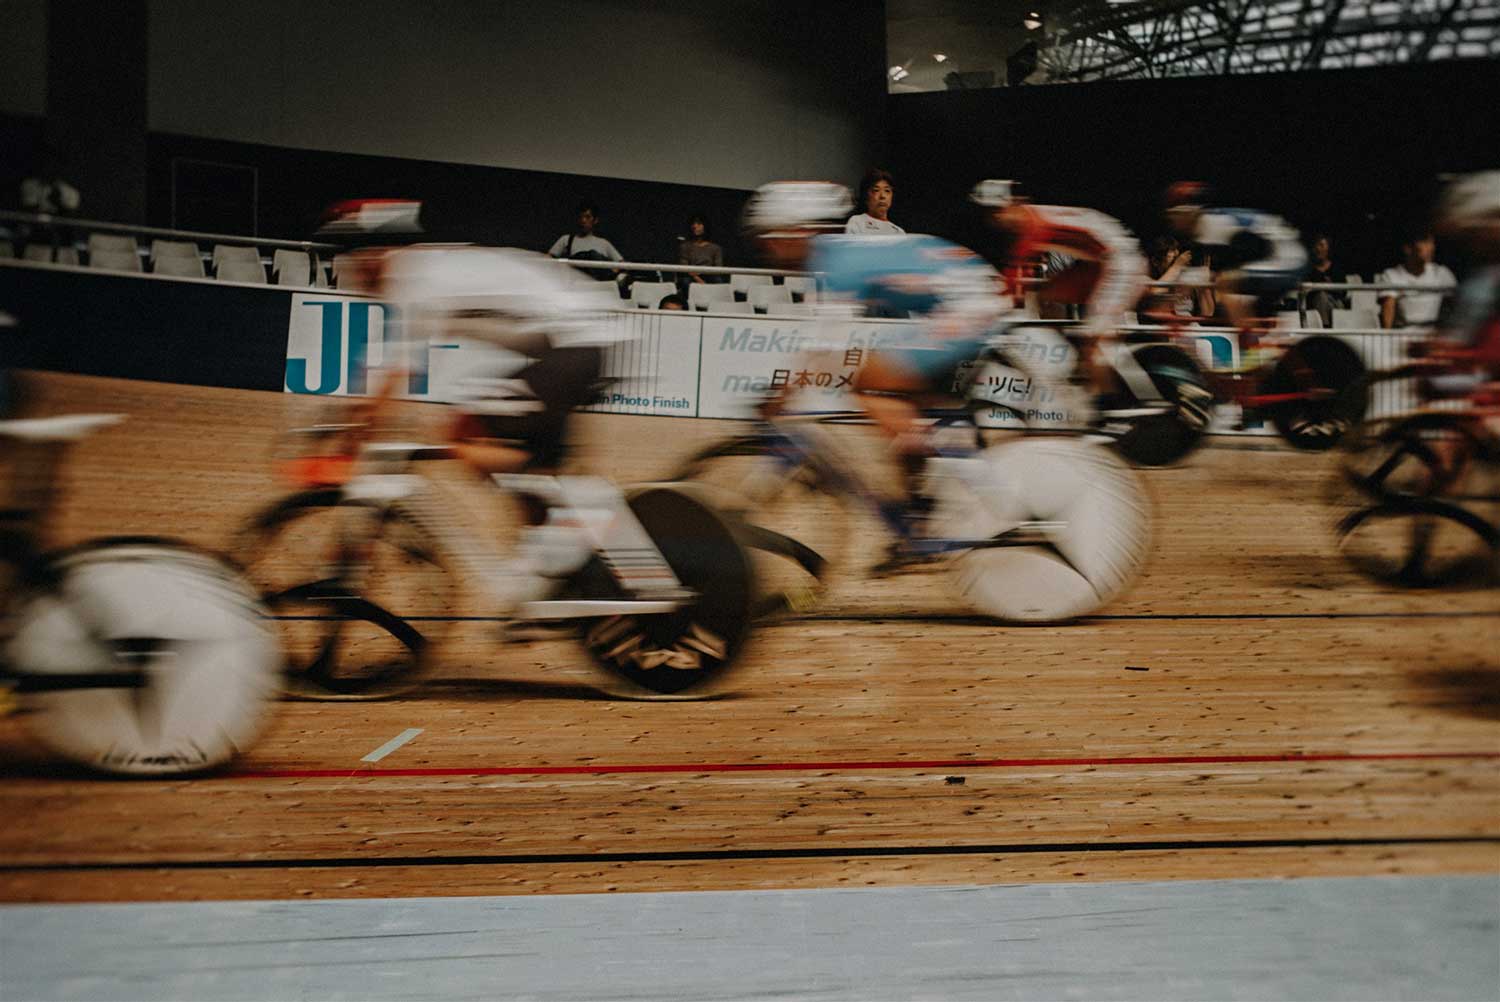 Blurred image of multiple track cyclists during Japan National cycling event at Izu Velodrome